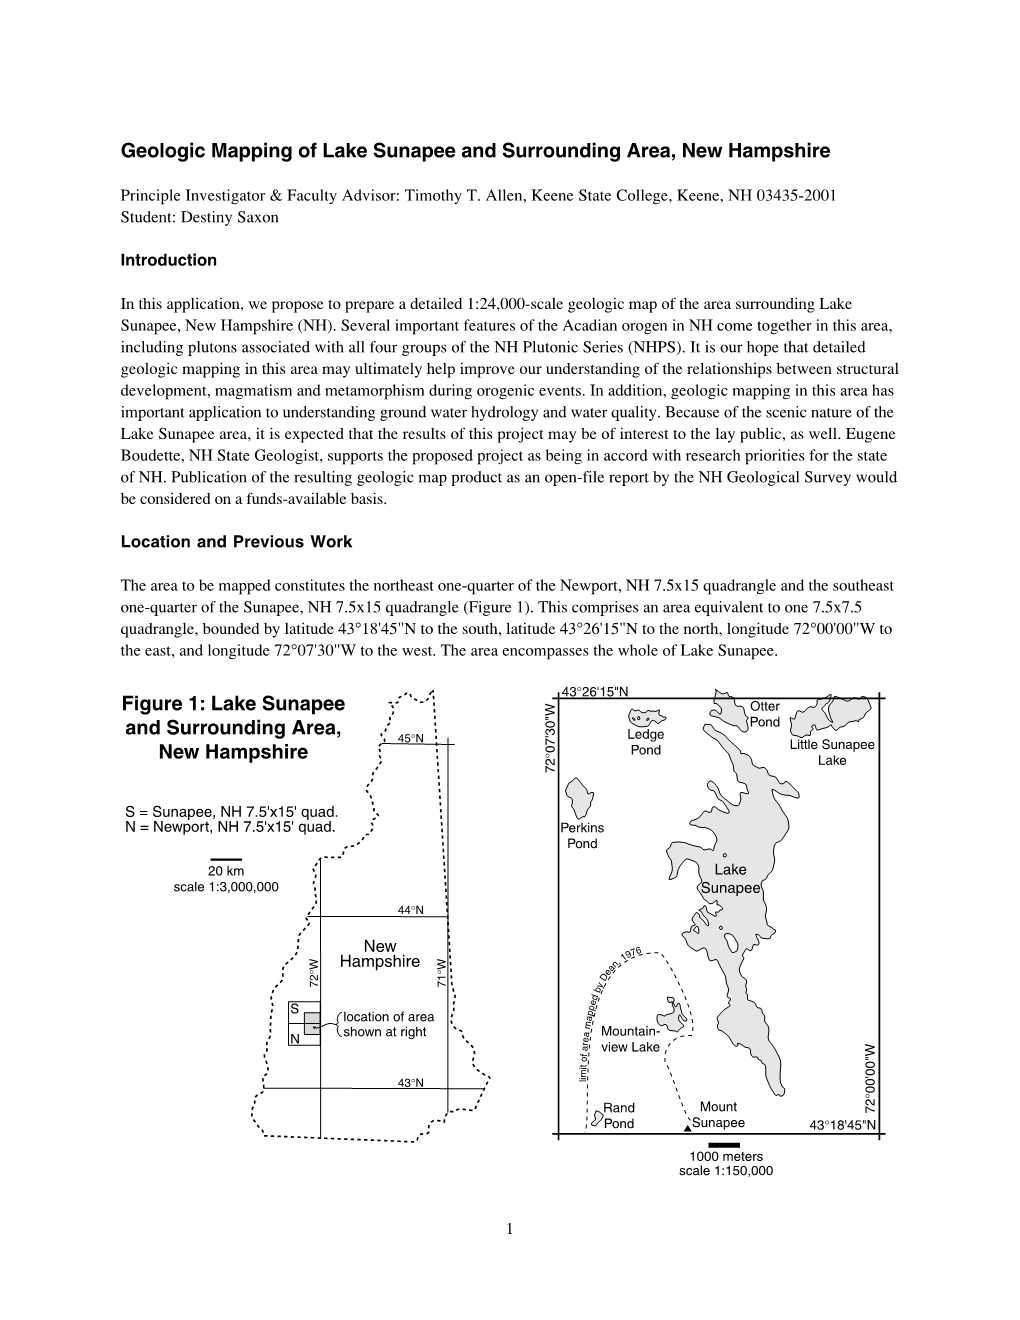 Geologic Mapping of Lake Sunapee and Surrounding Area, New Hampshire